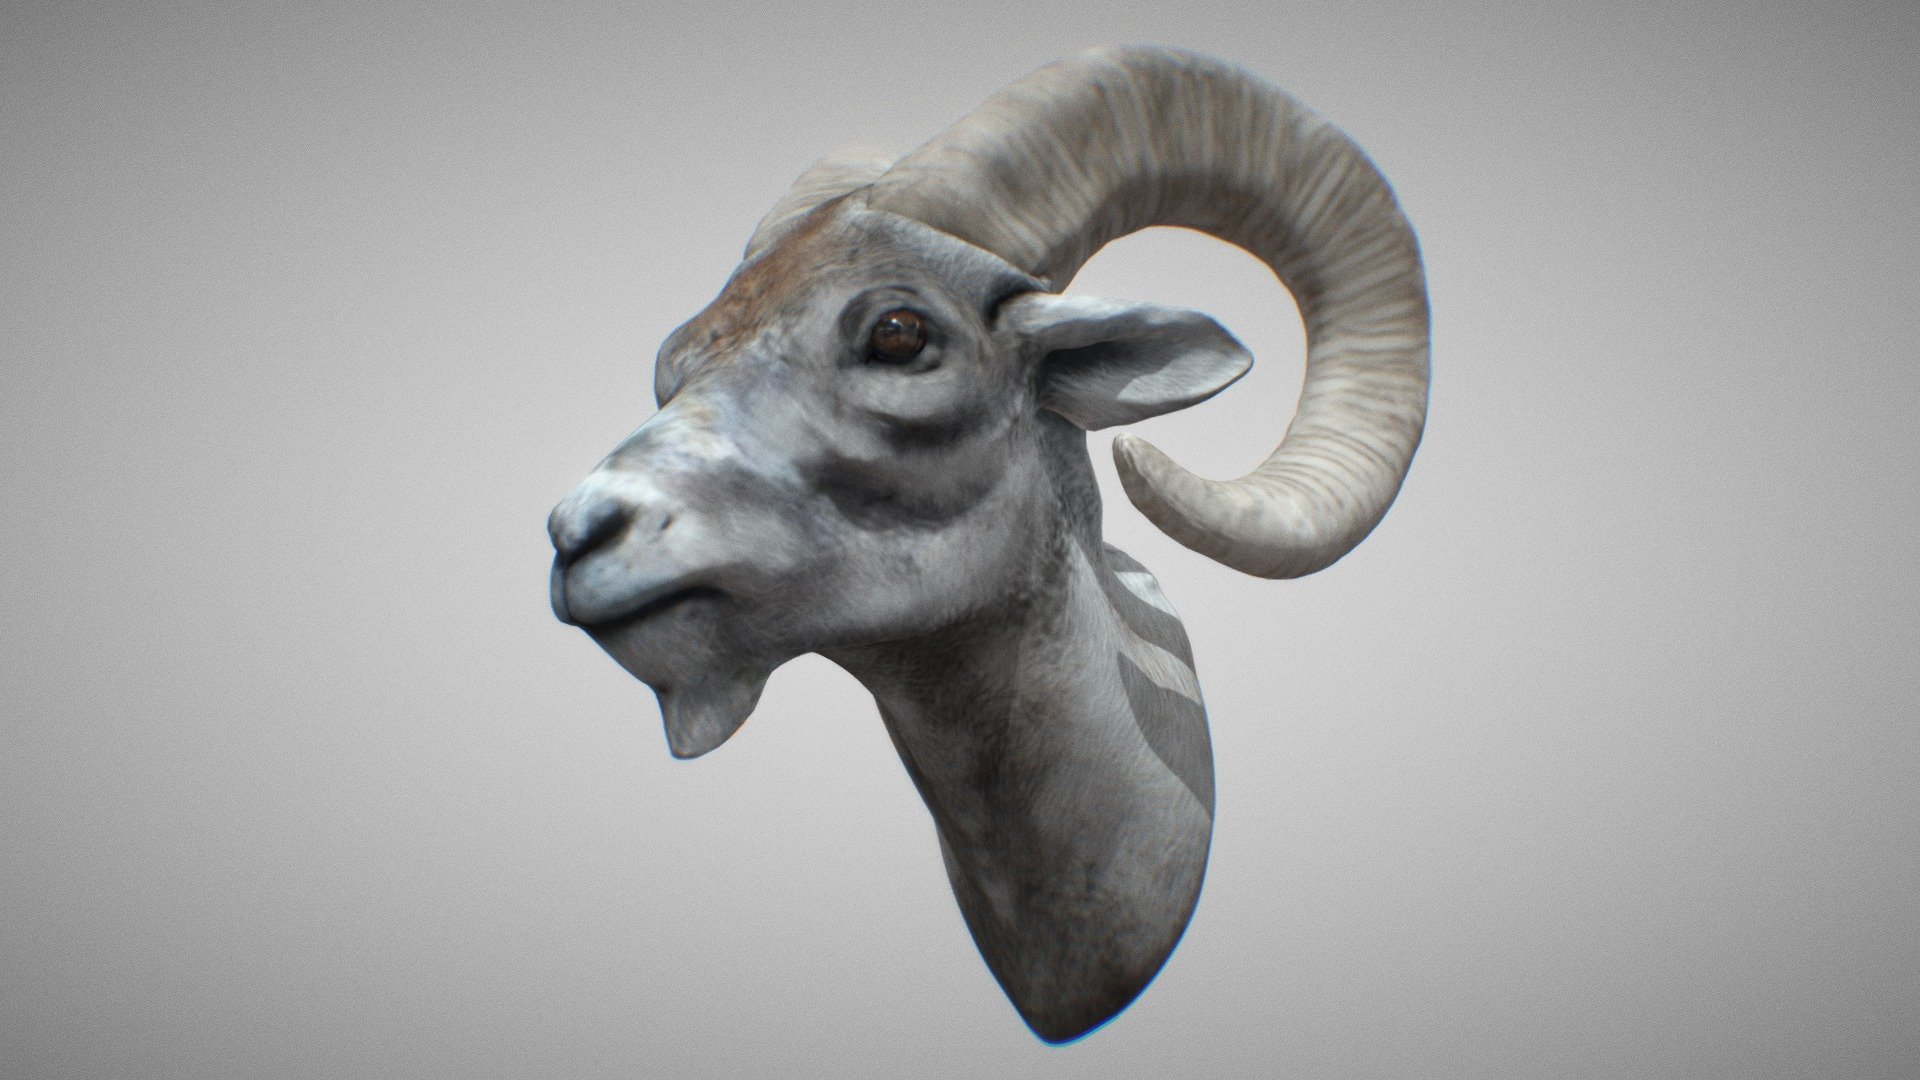 Goats are among the earliest animals domesticated by humans. The most recent genetic analysis confirms the archaeological evidence that the wild bezoar ibex of the Zagros Mountains is the likely original ancestor of probably all domestic goats today.

Neolithic farmers began to herd wild goats primarily for easy access to milk and meat, as well as to their dung, which was used as fuel; and their bones, hair, and sinew were used for clothing, building, and tools. The earliest remnants of domesticated goats dating 10,000 years before present are found in Ganj Dareh in Iran.

https://en.wikipedia.org/wiki/Goat

A bust sculpted and polypaint textured in zbrush. A full body sculpt and manual retopo/UV coming soon.

see more of my work on my website and instagram:

https://www.tomjohnsonart.co.uk/

https://www.instagram.com/tomjohnsonart/ - Horned Goat - Buy Royalty Free 3D model by Tom Johnson (@Brigyon) 3d model